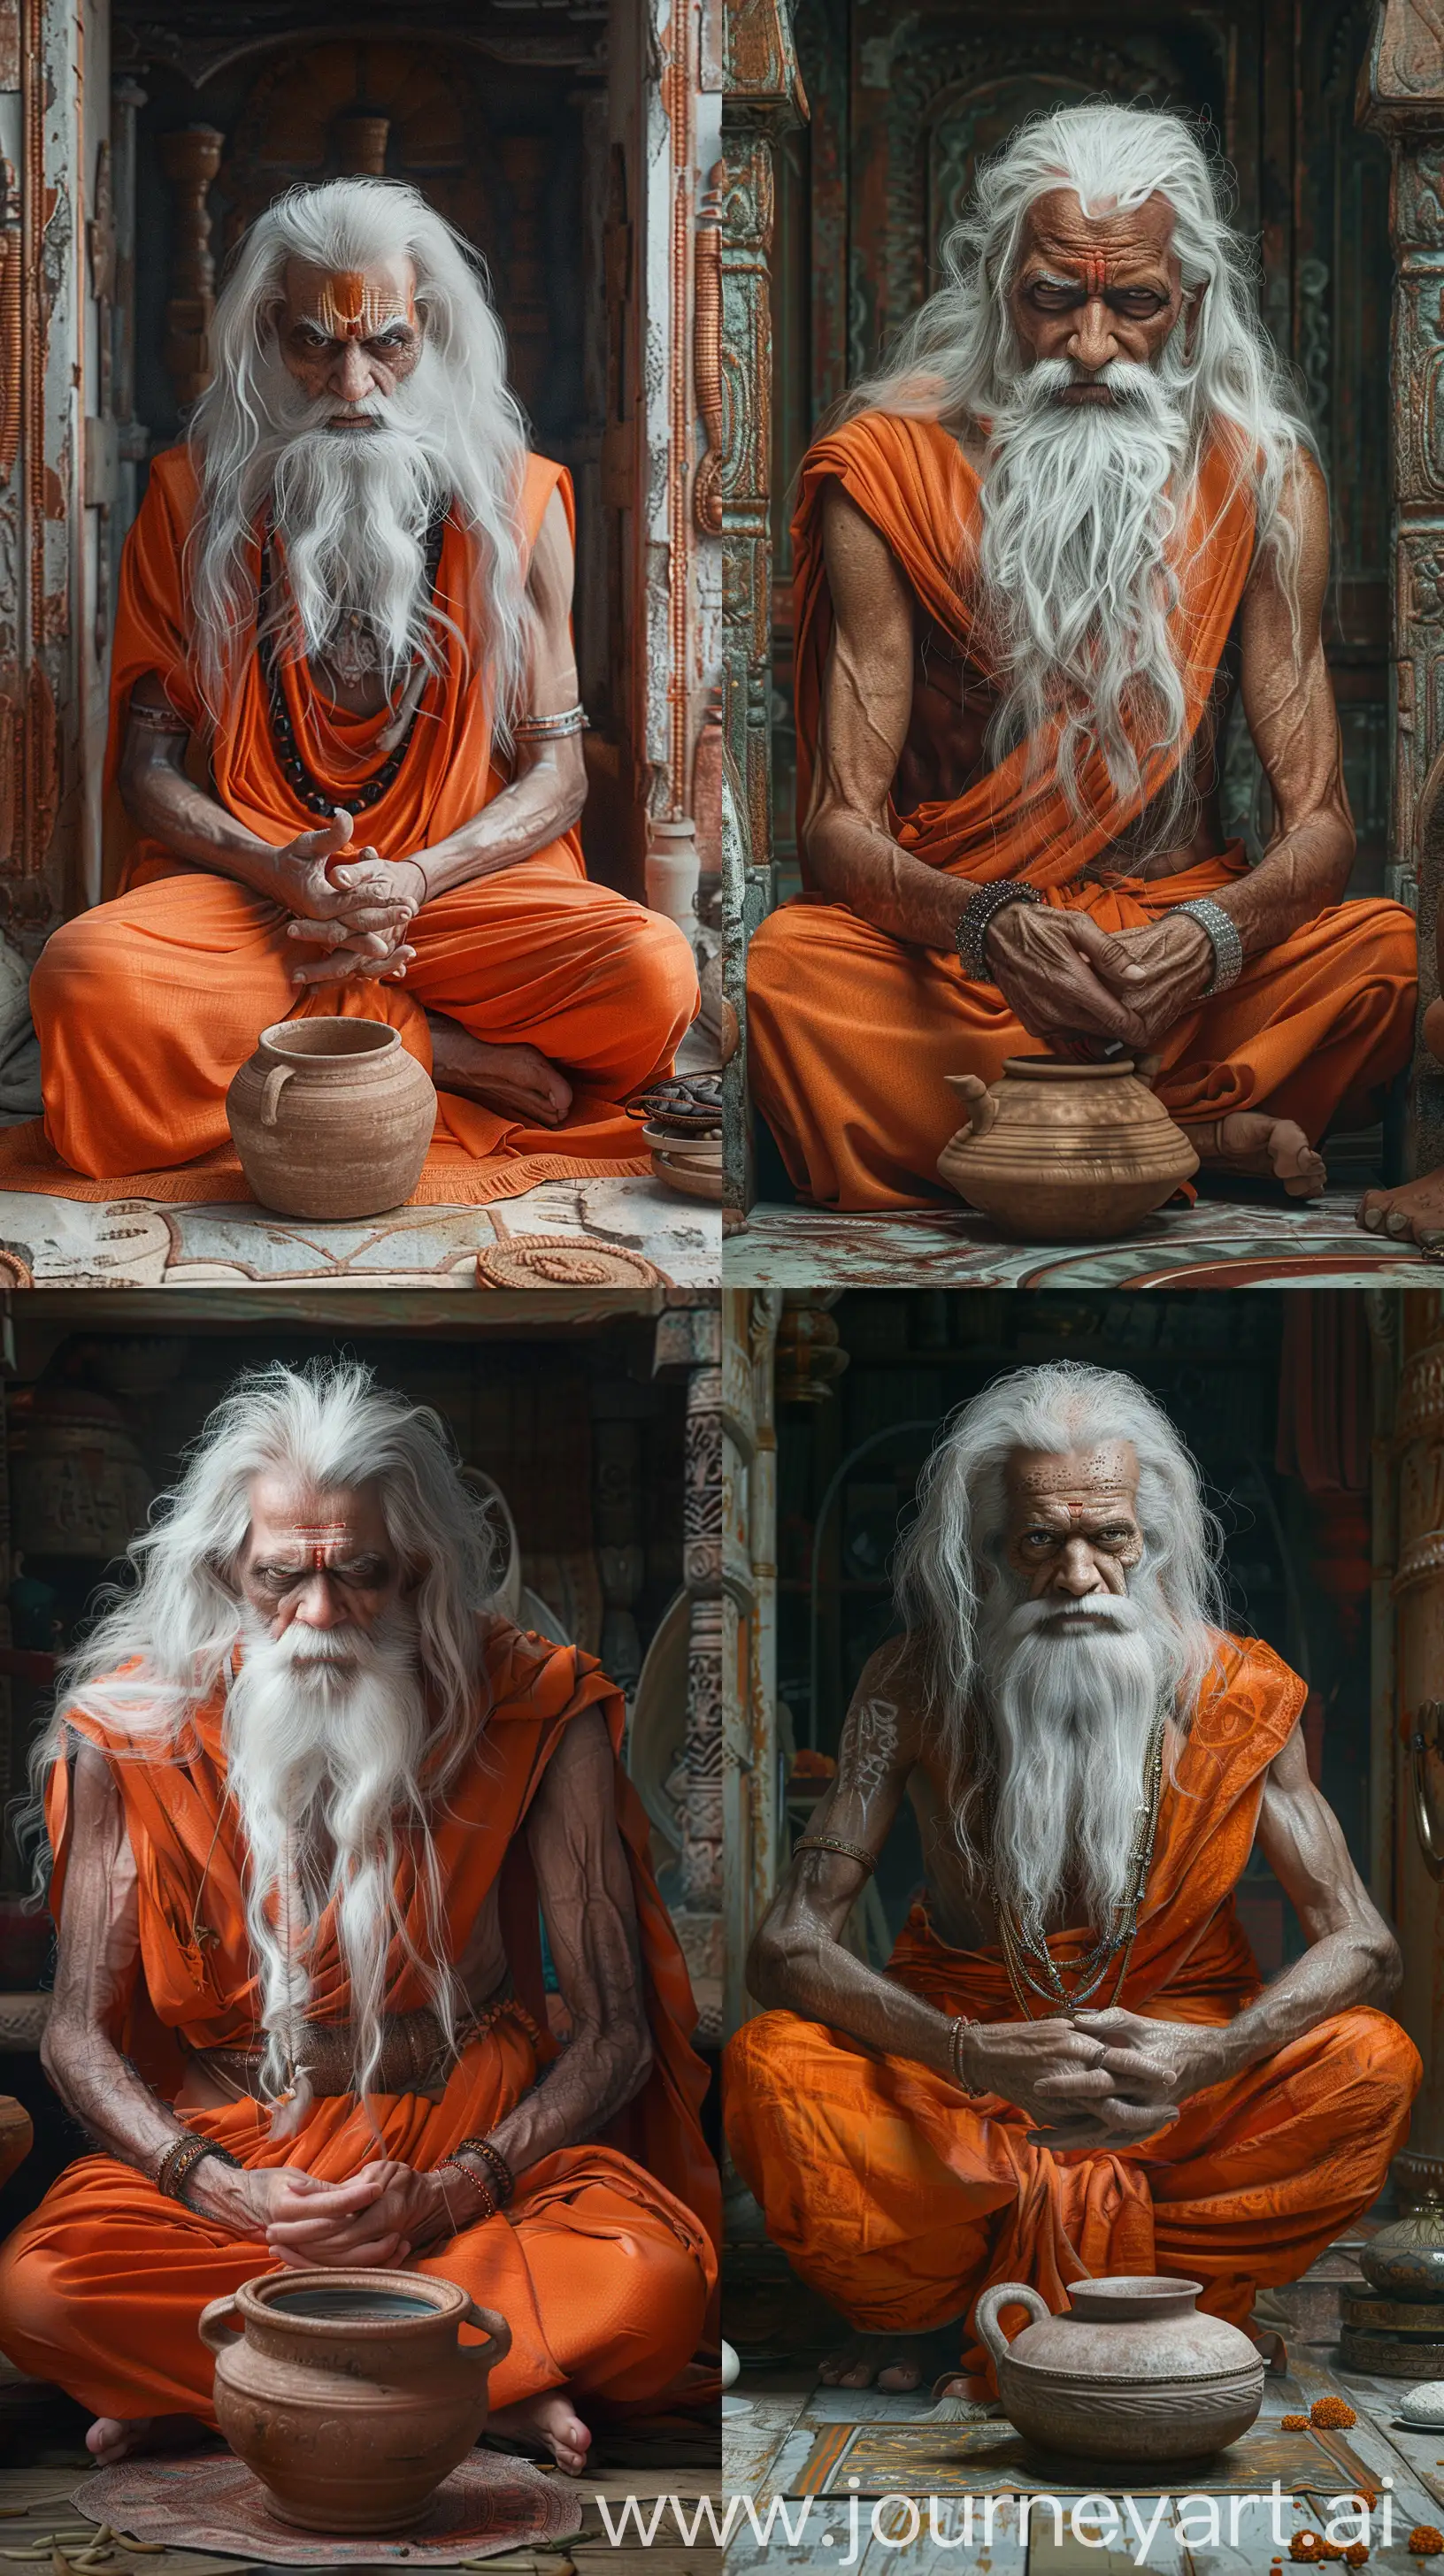 Hyper realistic image of an Indian sage, slim, in orange attire, with white long hair and beard, angry expression on his face, seated with his hands folded on the floor, inside his house, a earthen water pot is put in front of him, intricate details 8k image --s 200 --ar 9:16 --v 6